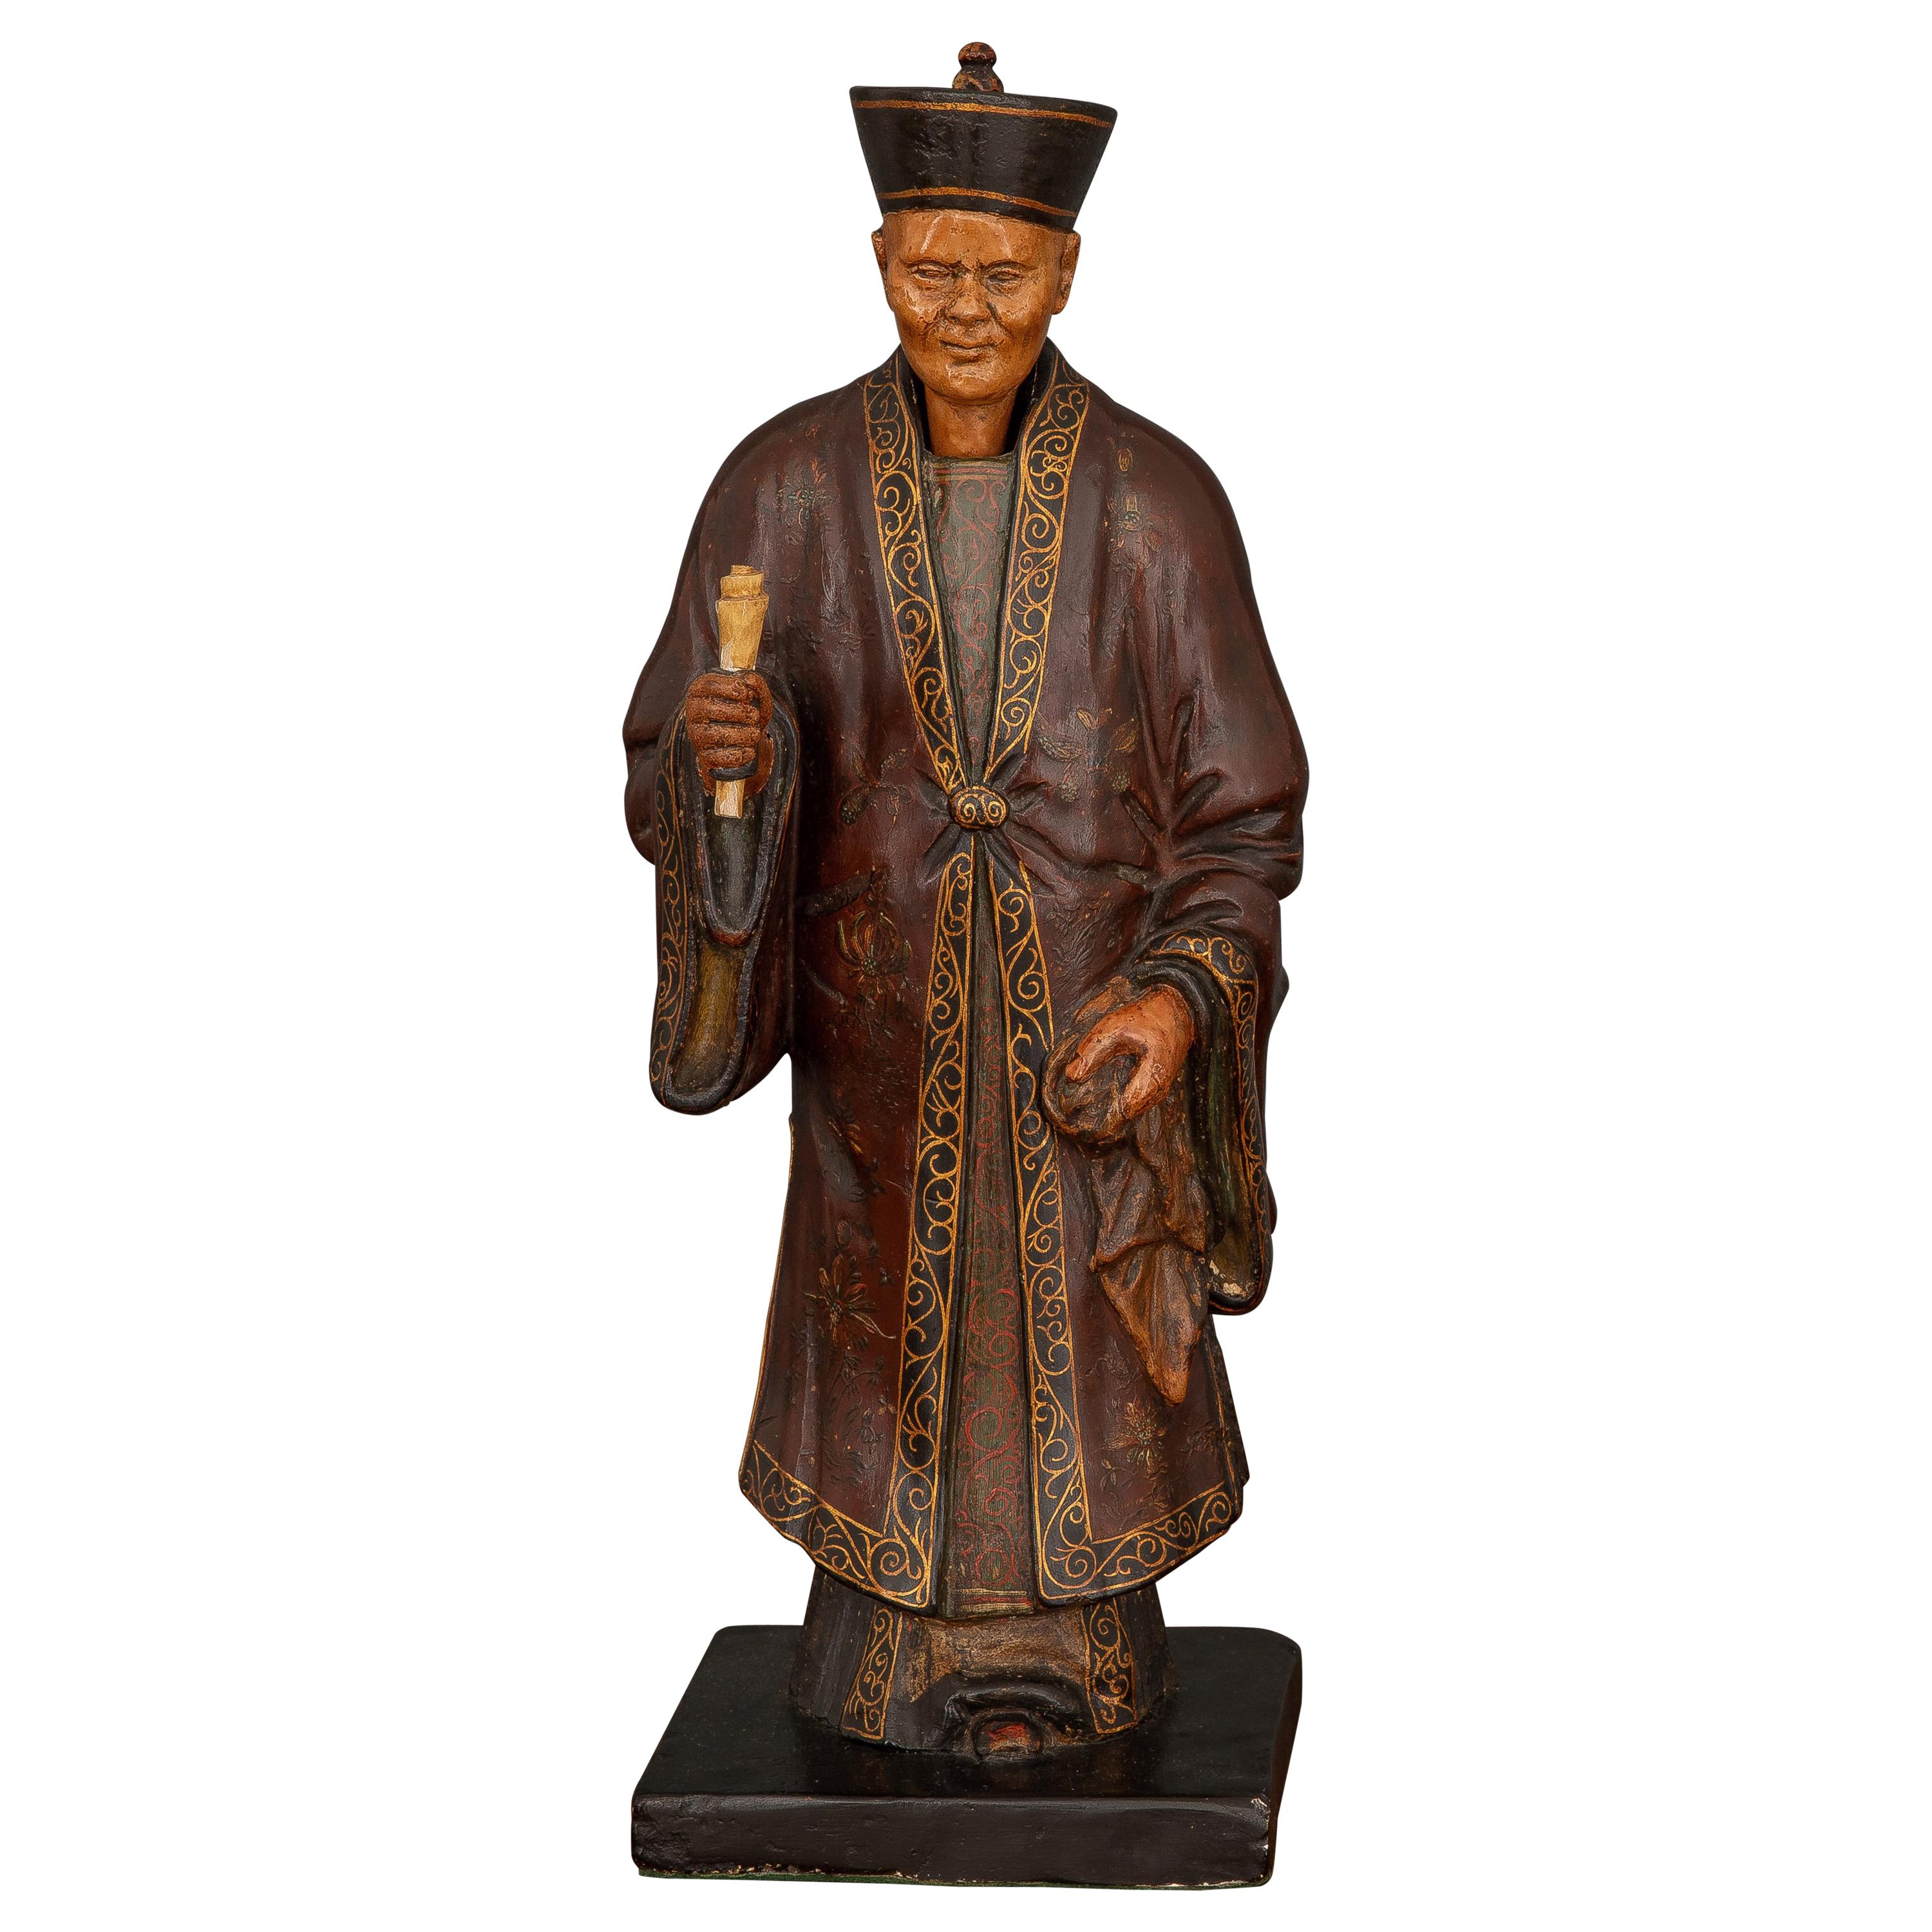 Regency Plaster Nodding Head Figure of a Chinese Official or Merchant by Robert For Sale